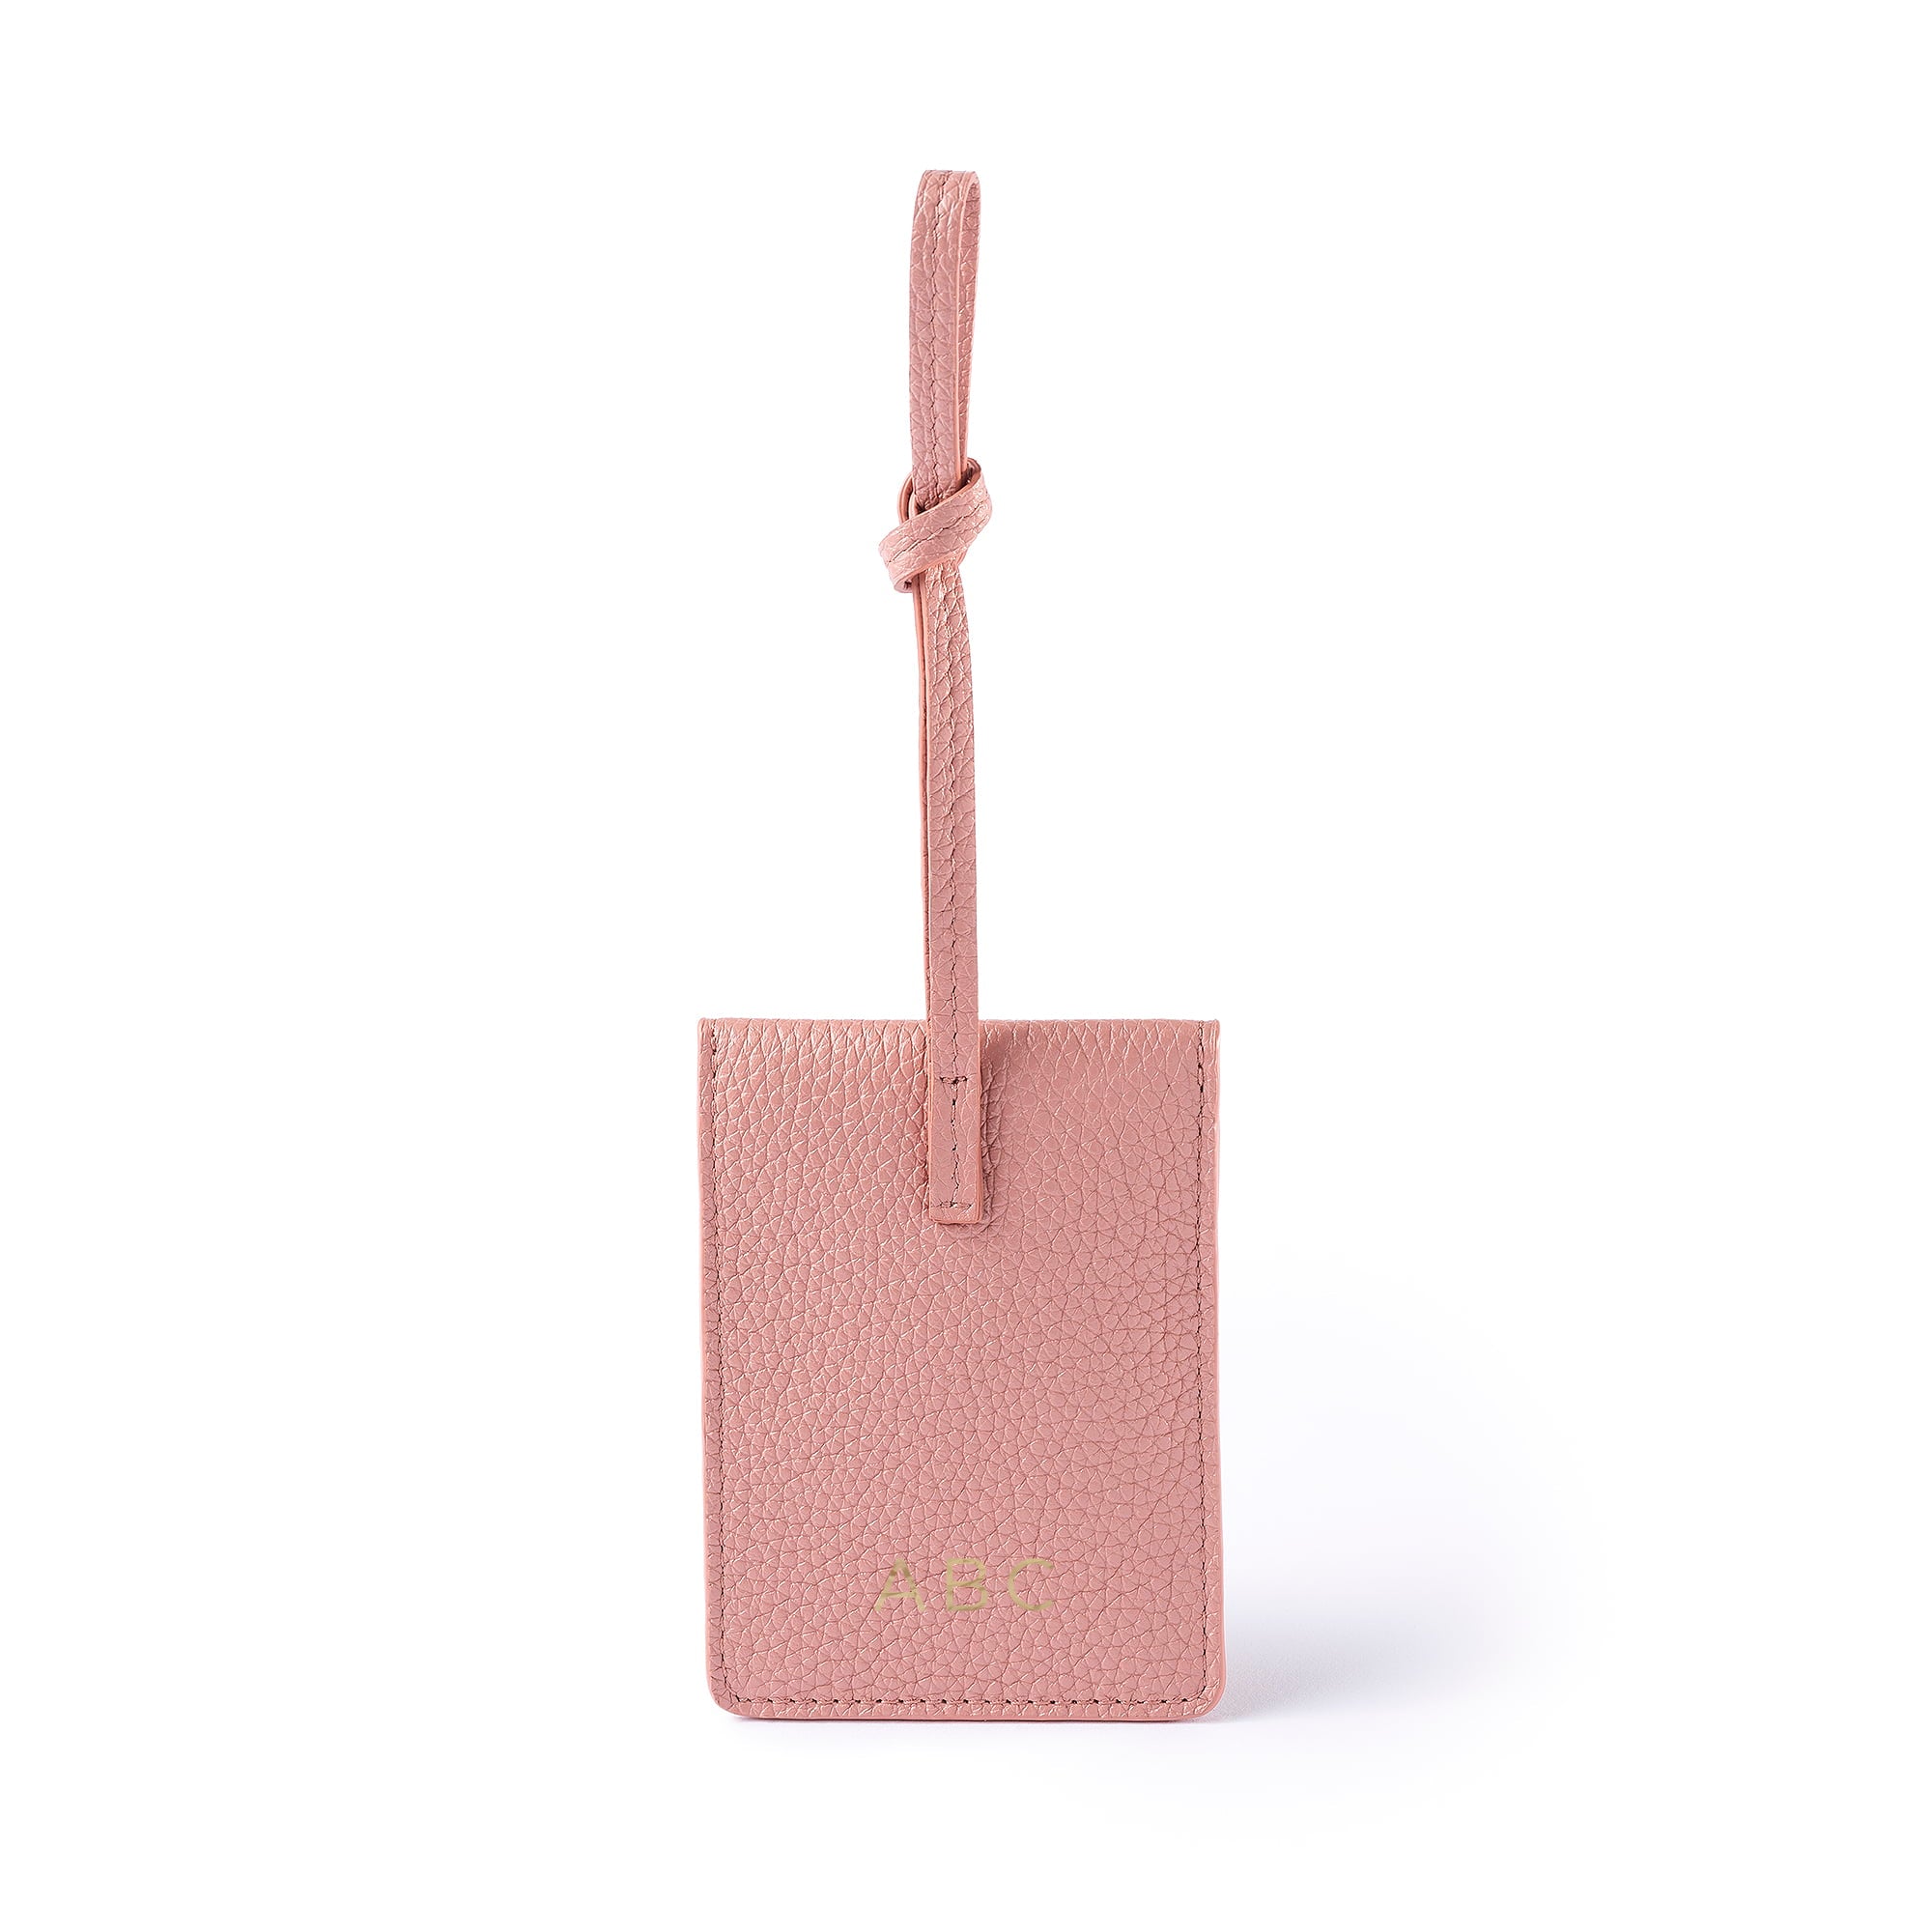 STOW Leather Multi Tag in Hazy Blush pebbled leather with personalised initials on the back.